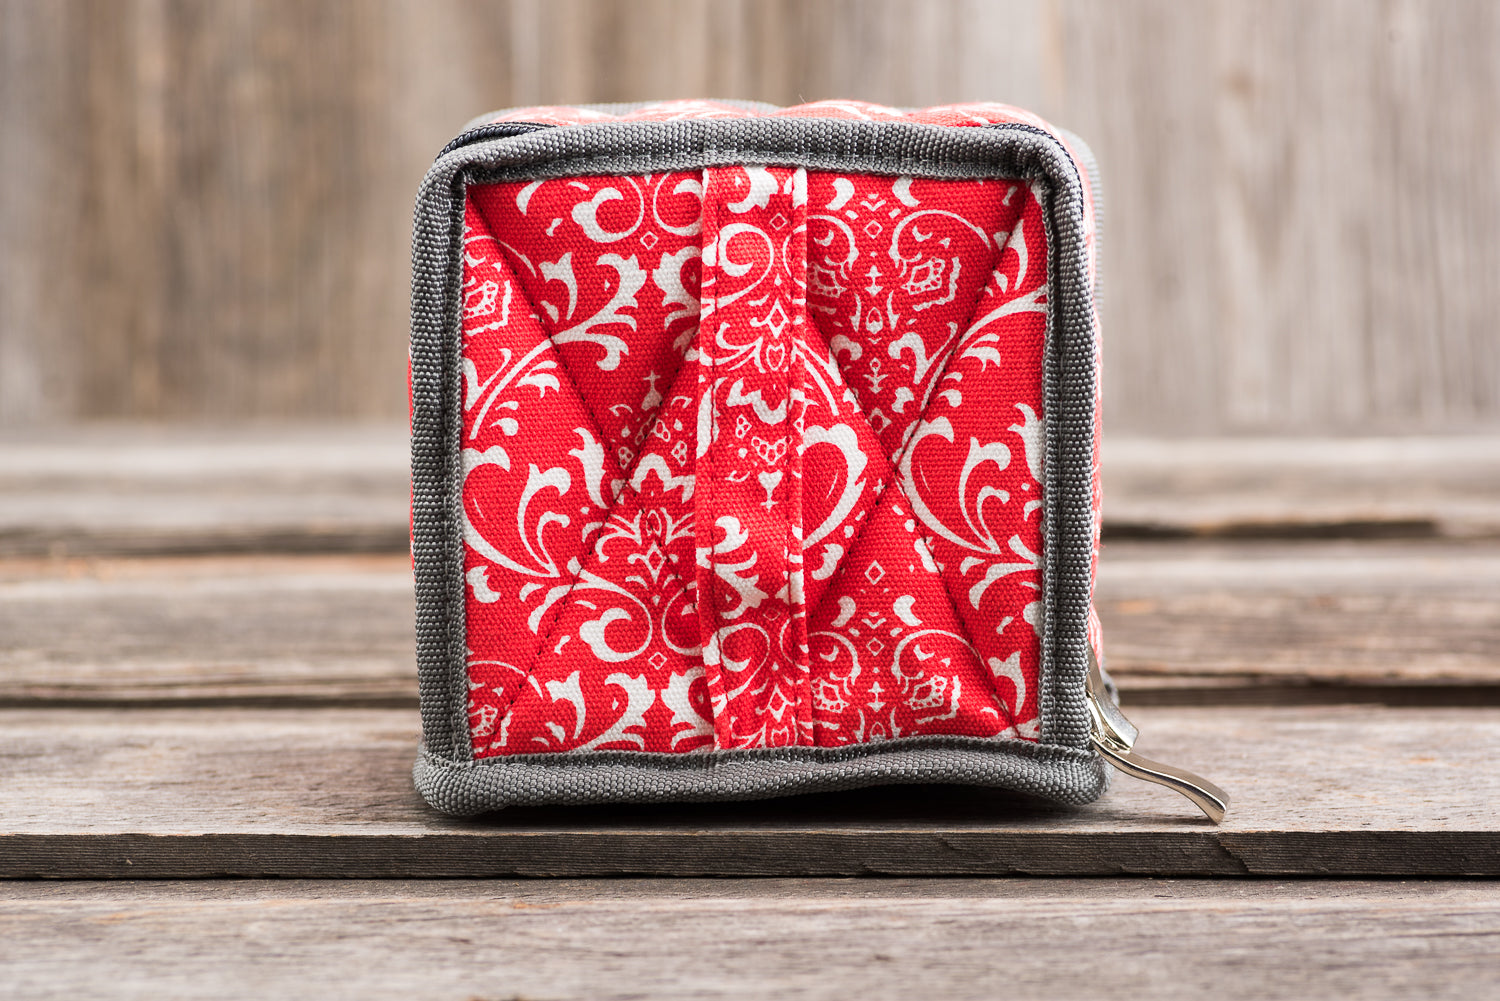 Medium Durable Red Damask Print Essential Oil Carrying Case